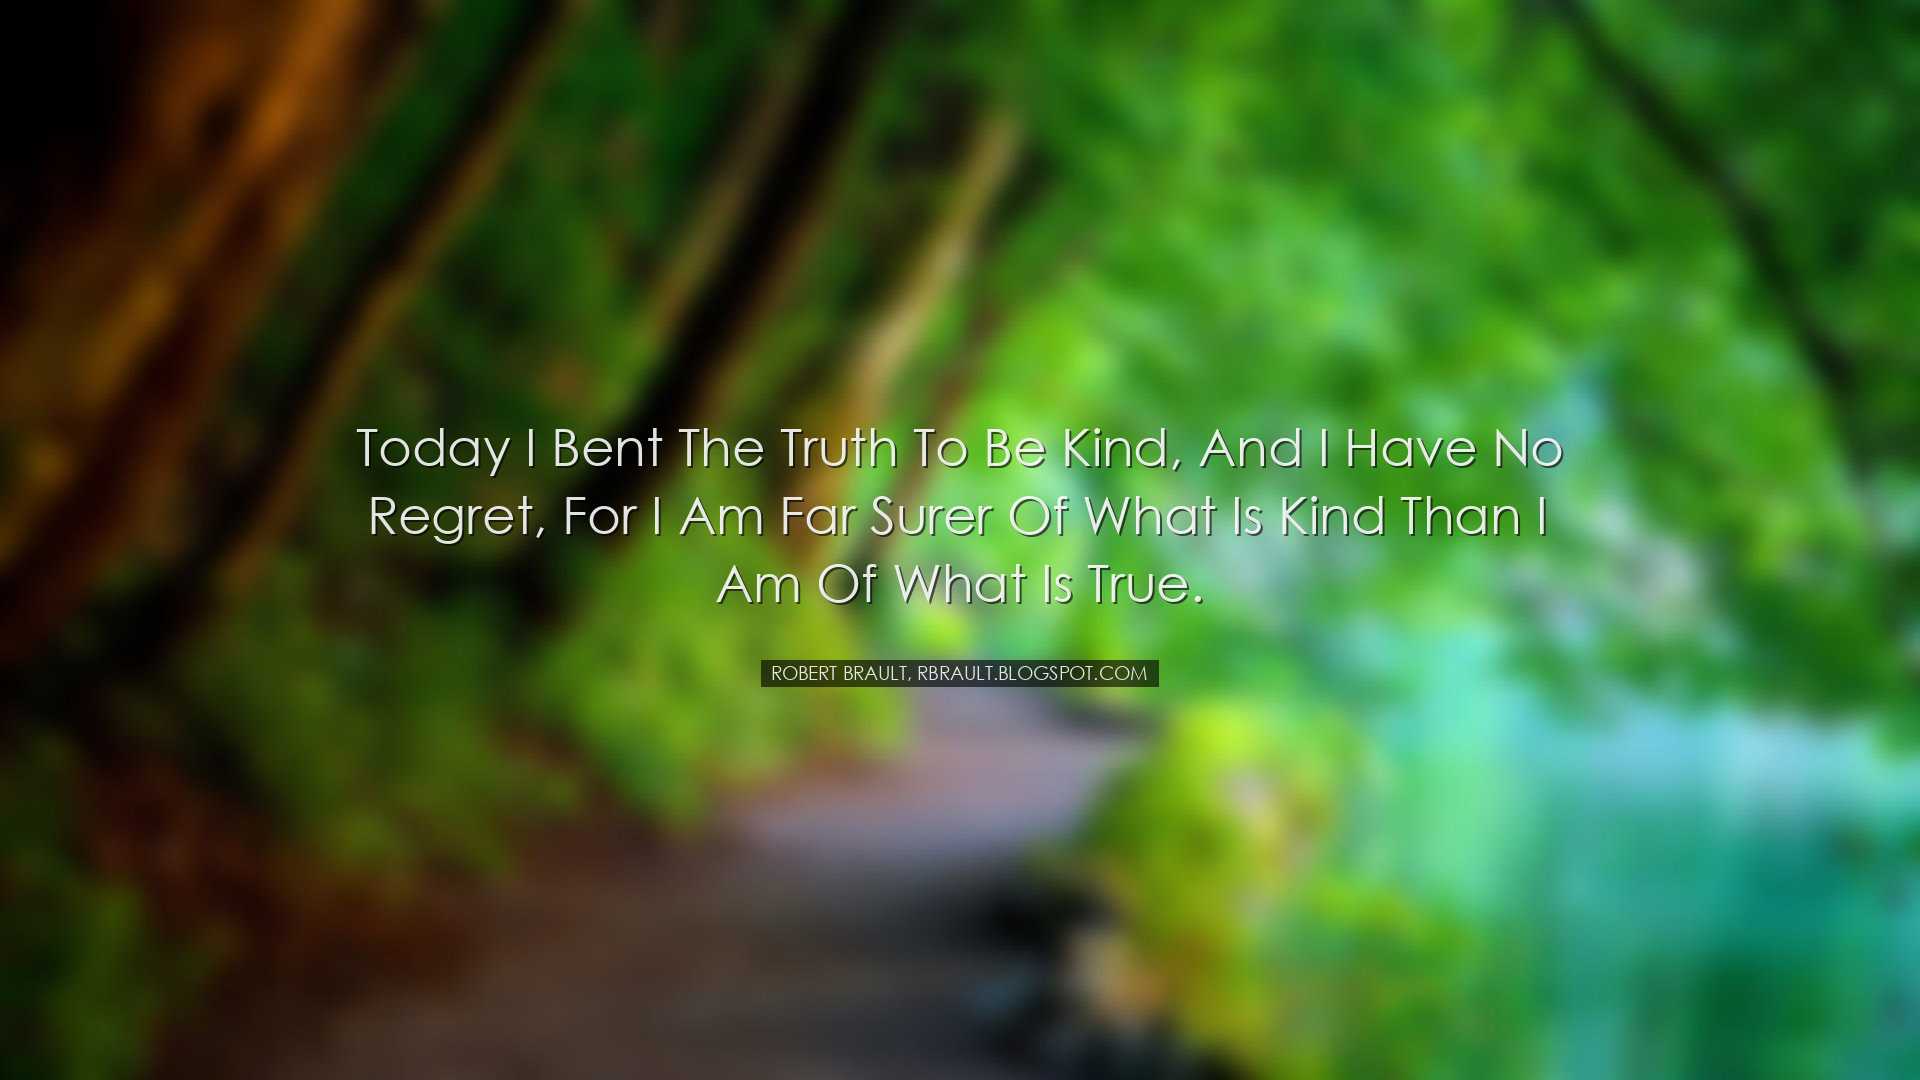 Today I bent the truth to be kind, and I have no regret, for I am